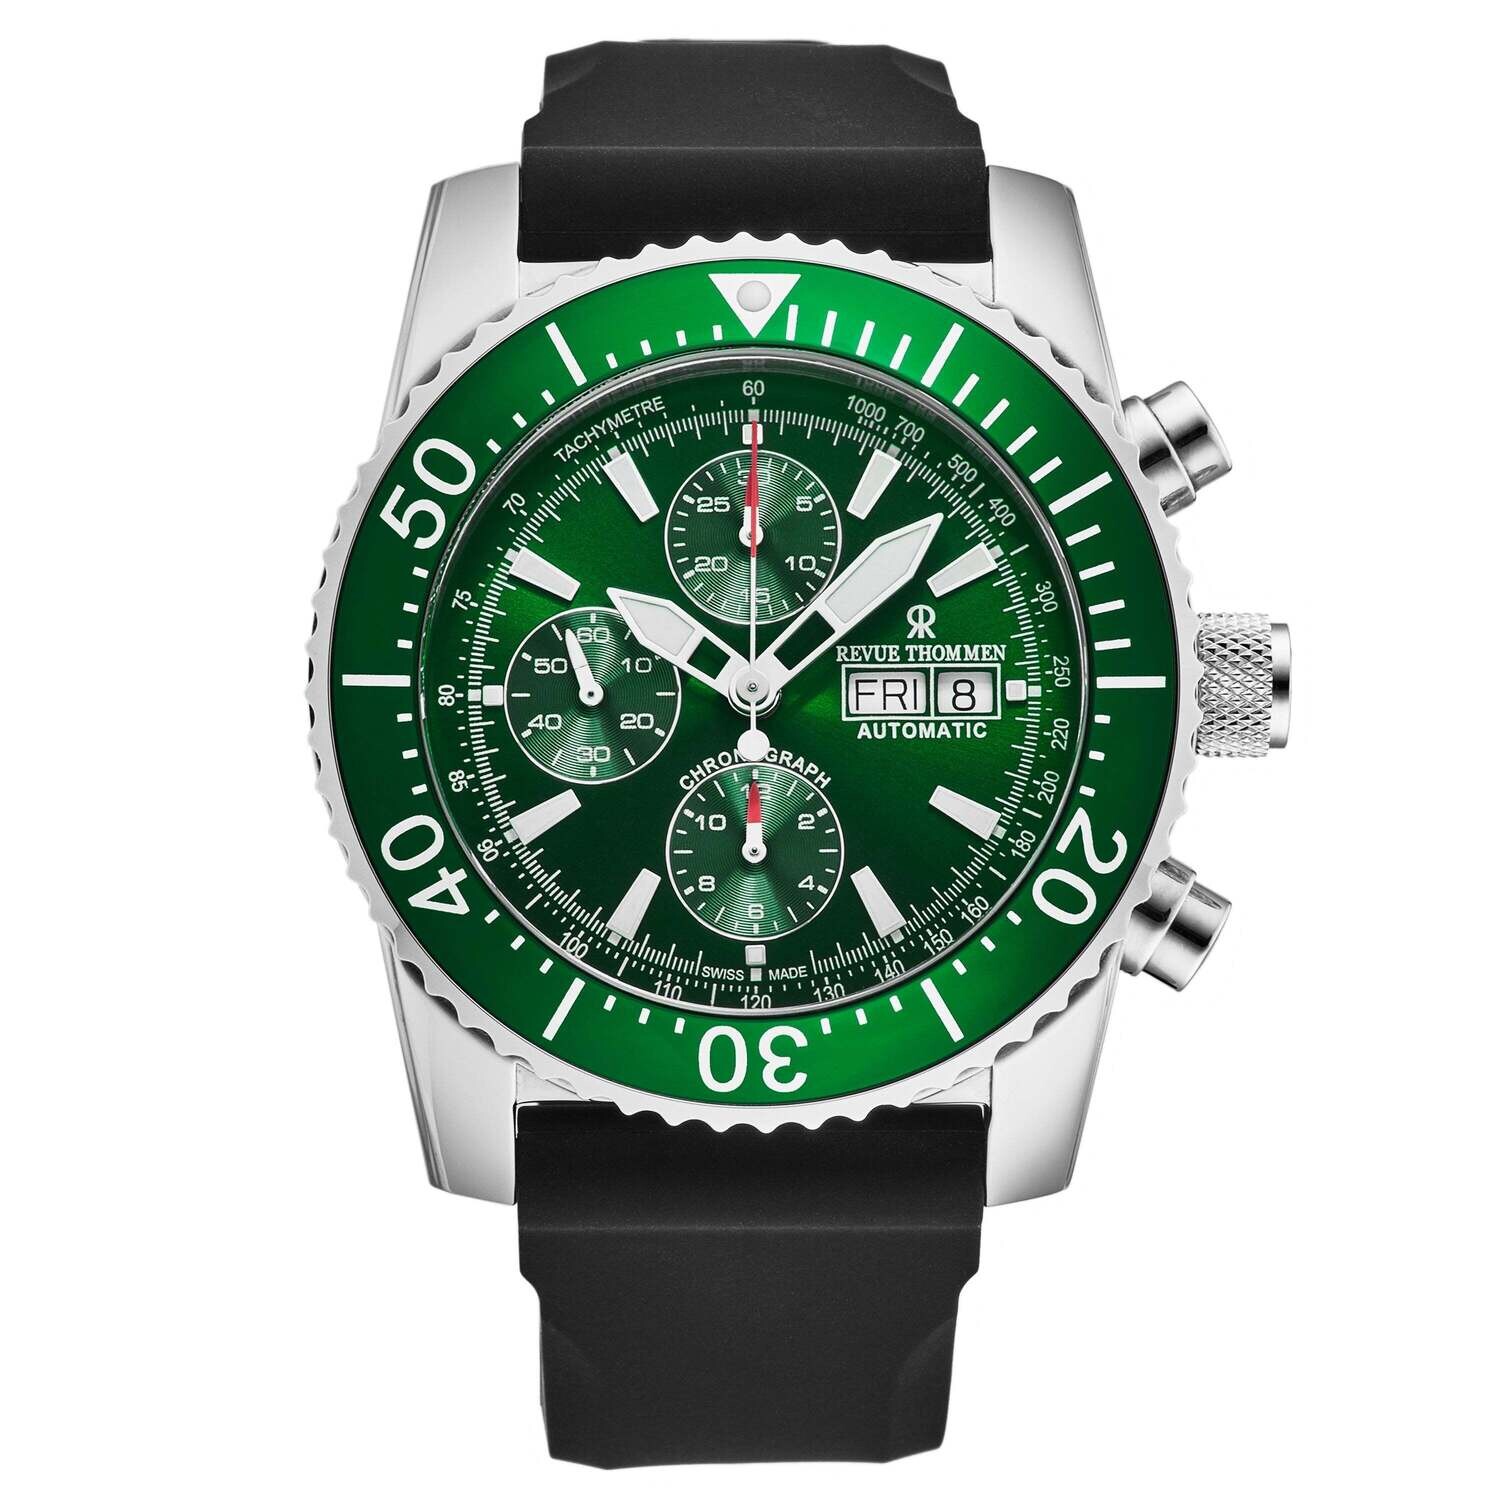 Revue Thommen Men's 17030.6532 'Divers' Green Dial Day-Date Chronograph Rubber Strap Automatic Watch